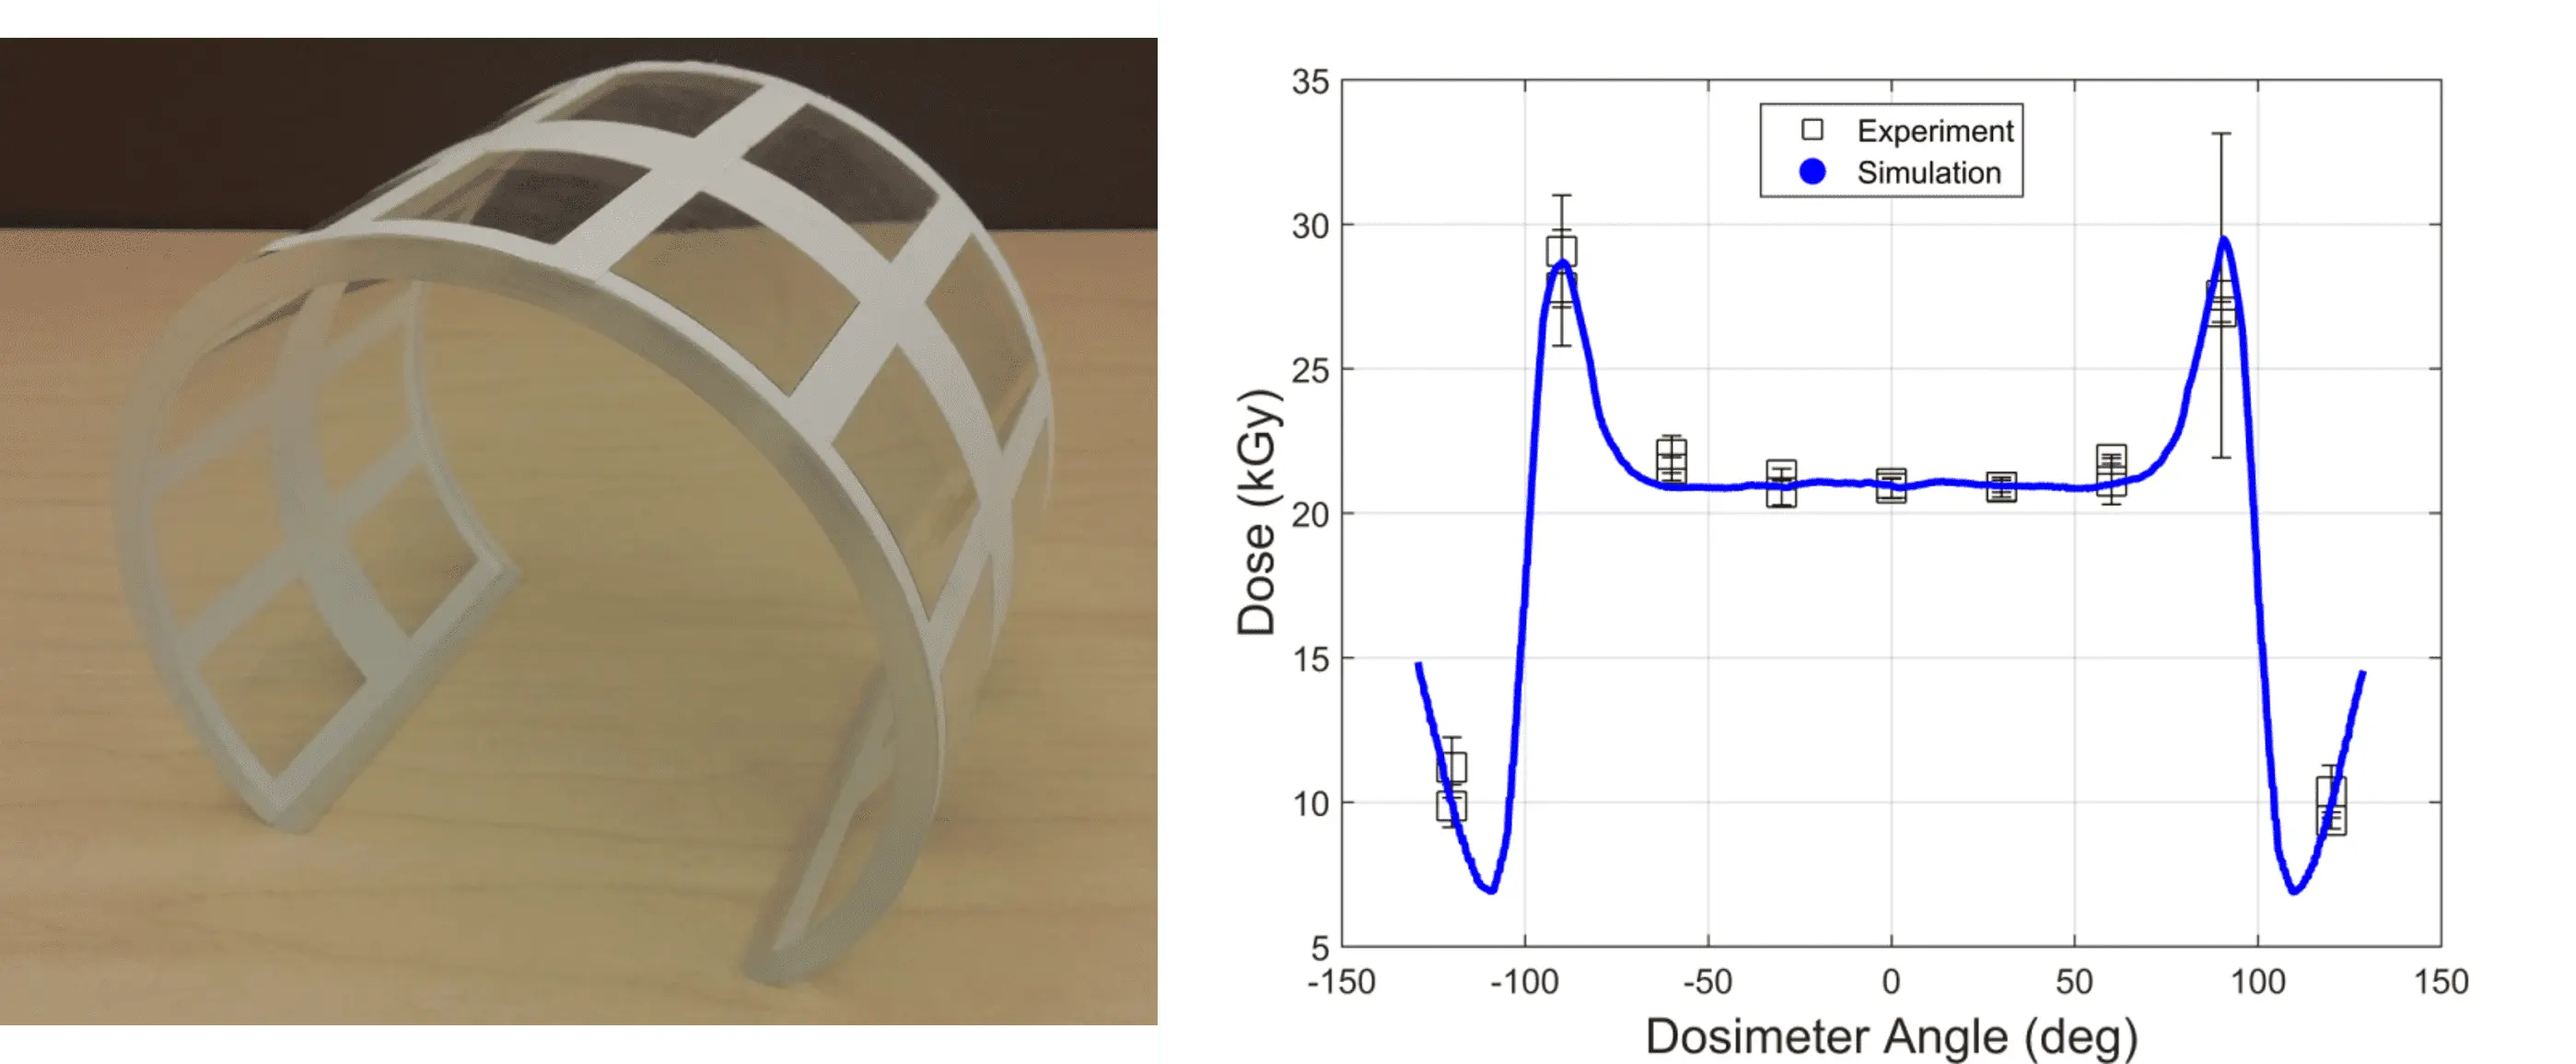 Dose profiles around the outer surface of an acrylic cylinder irradiated by a 10 MeV e-beam as measured and simulated by Dose Insight's virtual dose mapping tool